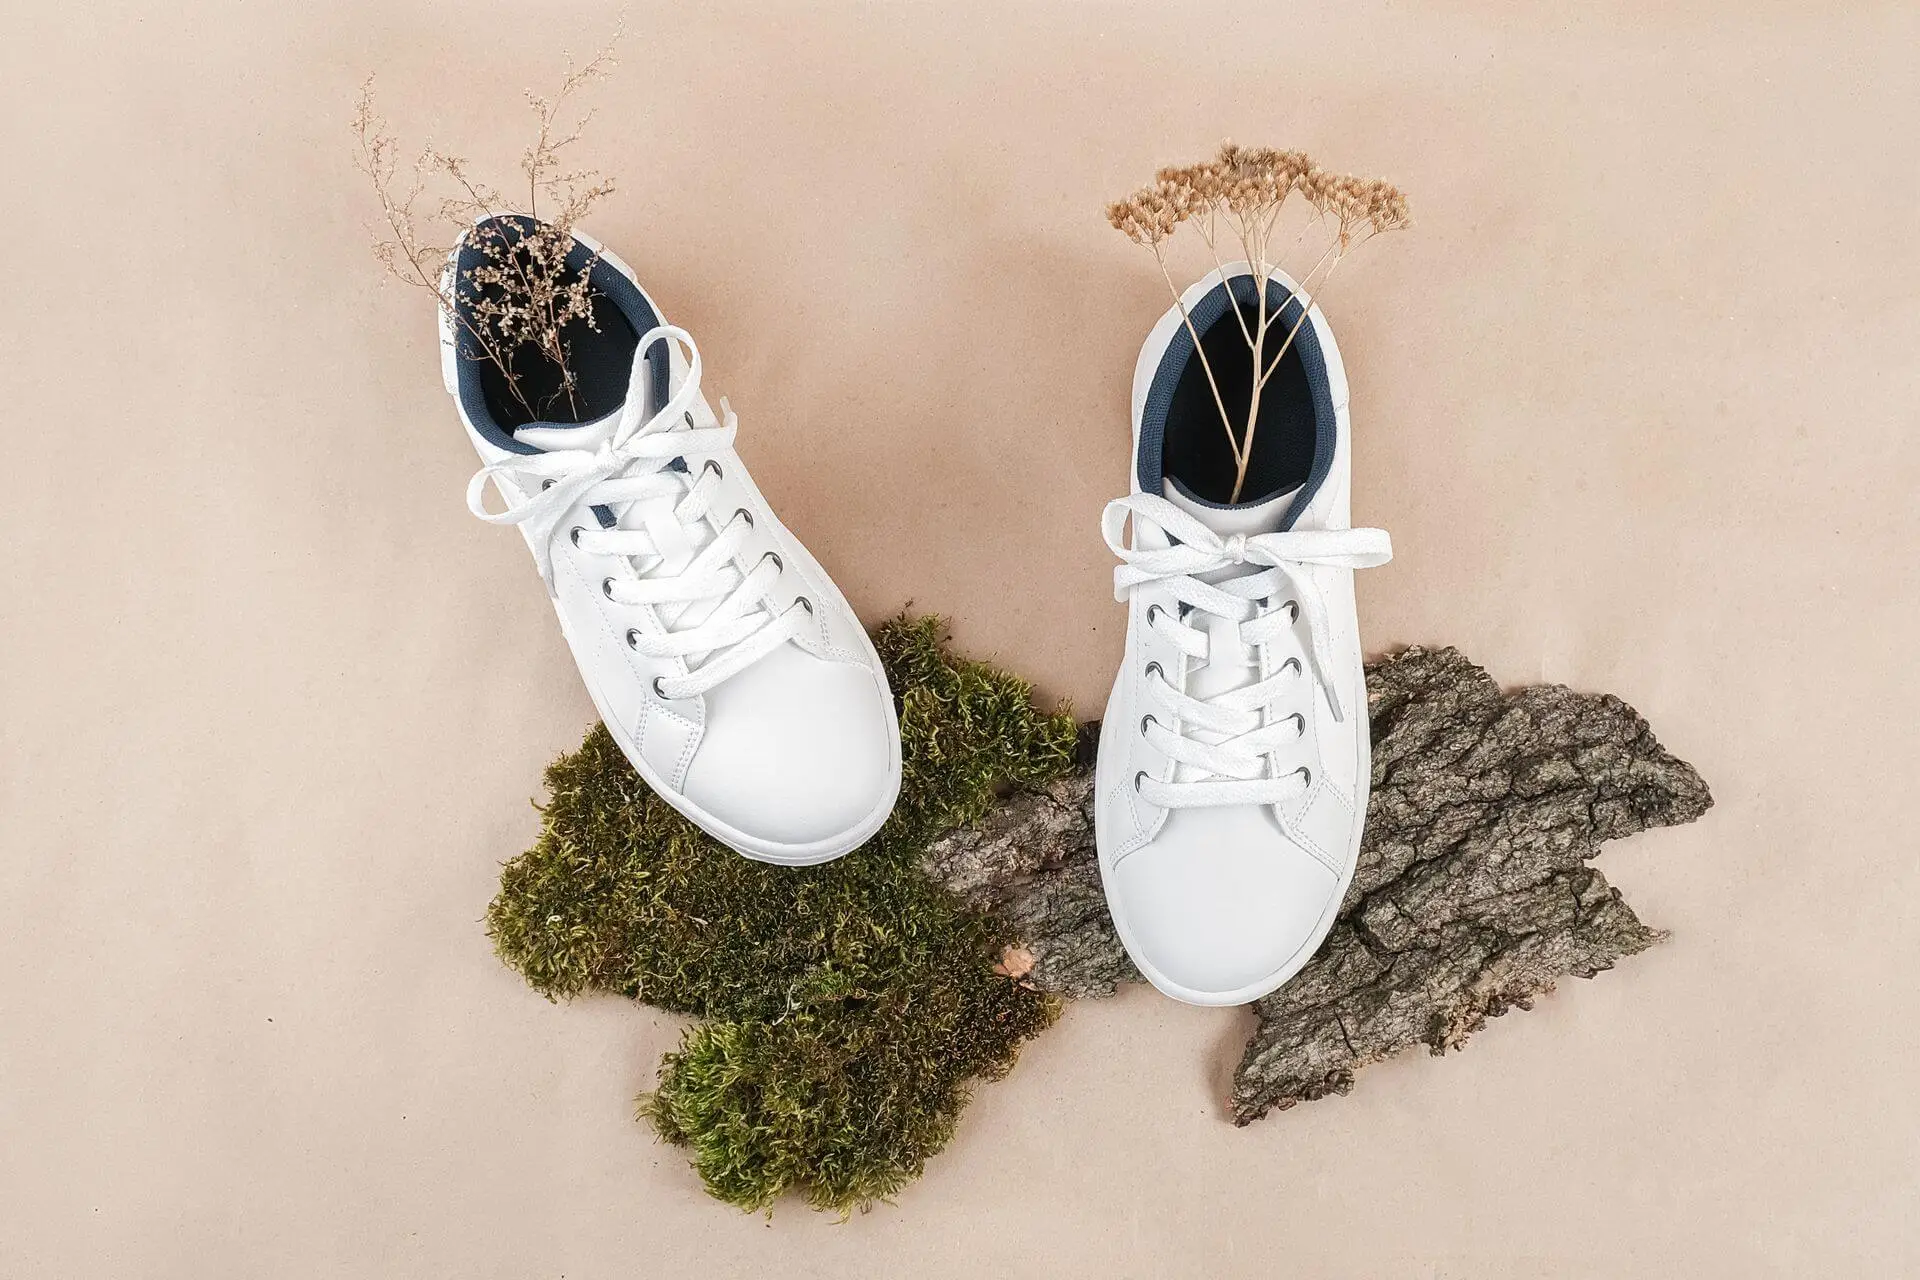 ethical vegan shoes concept. a pair of white sneakers with dry flowers on tree bark and moss